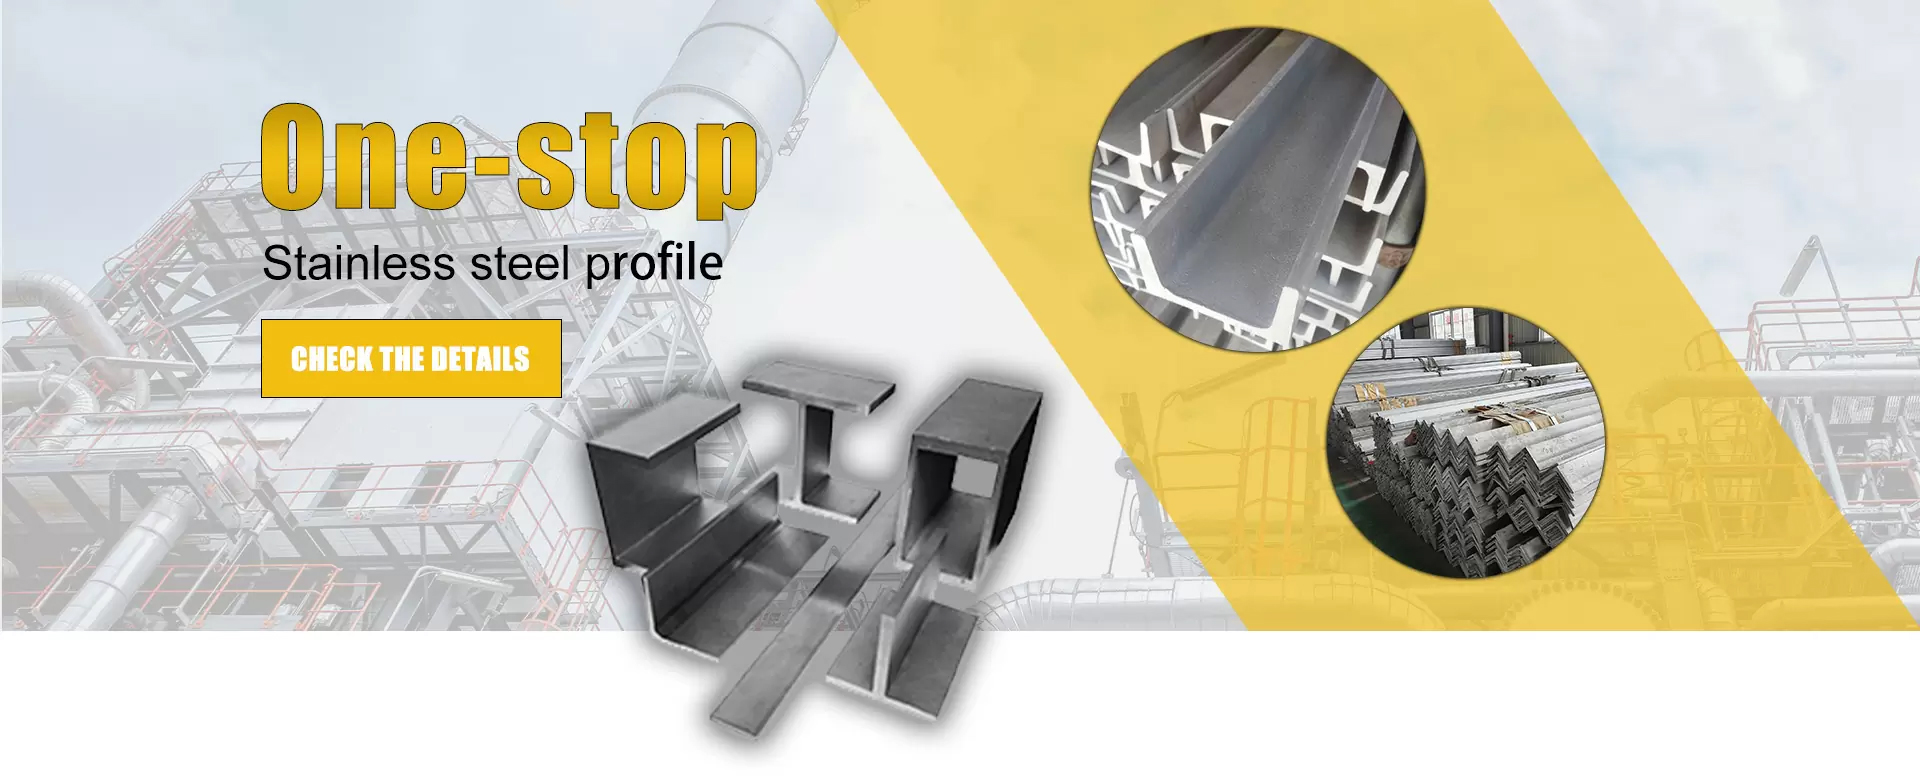 Onc-stop Stainless steel profile